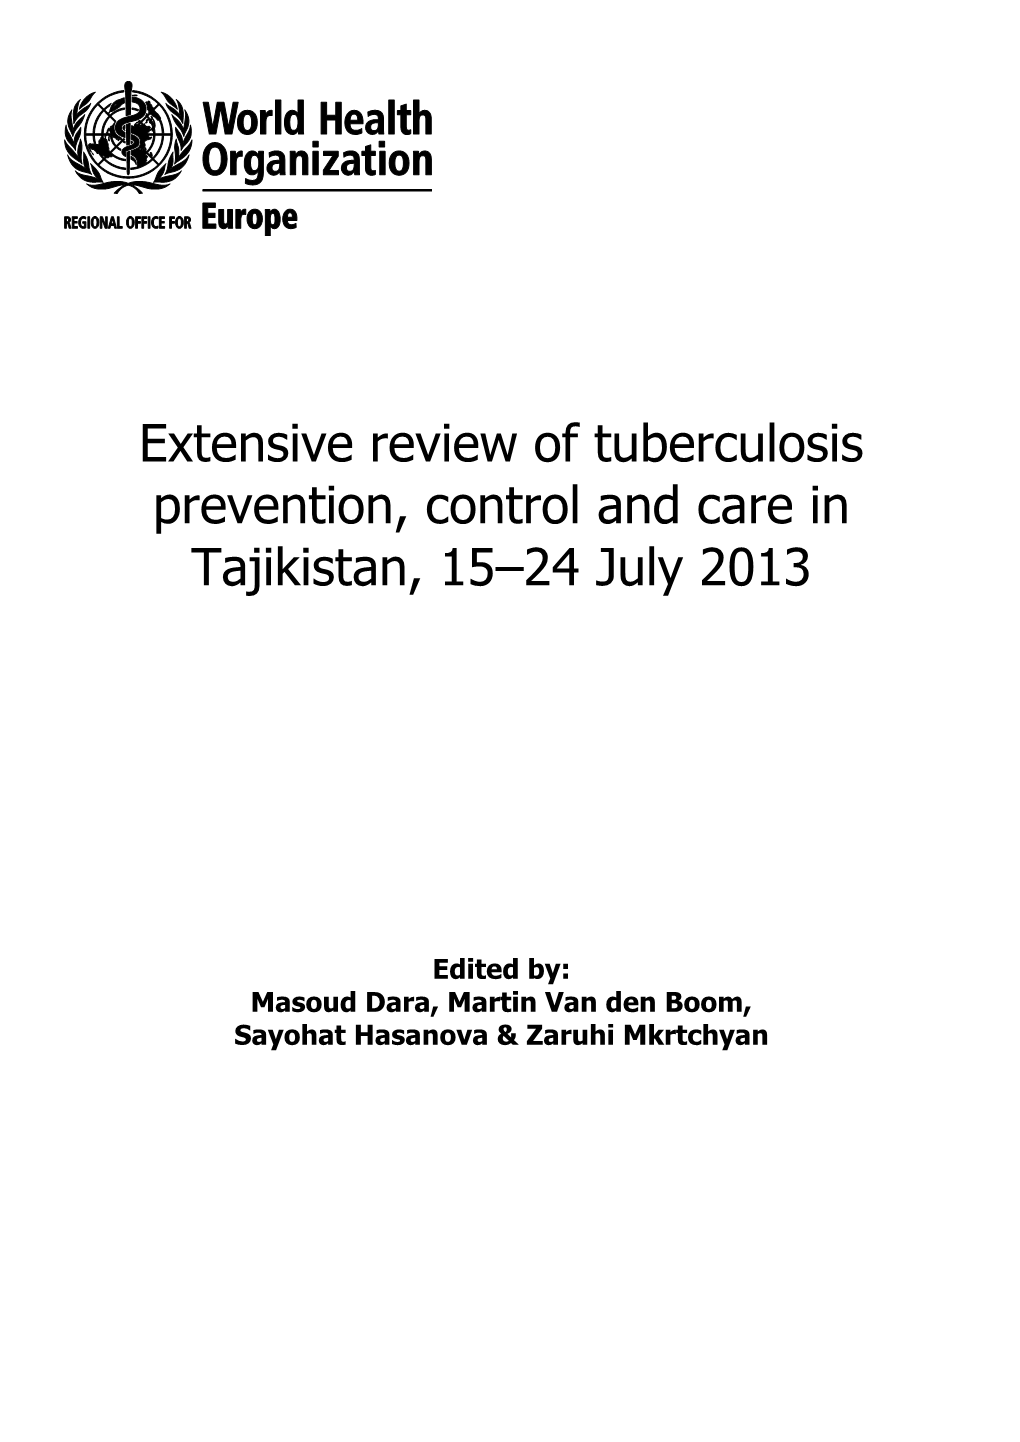 Extensive Review of Tuberculosis Prevention, Control and Care in Tajikistan, 15–24 July 2013